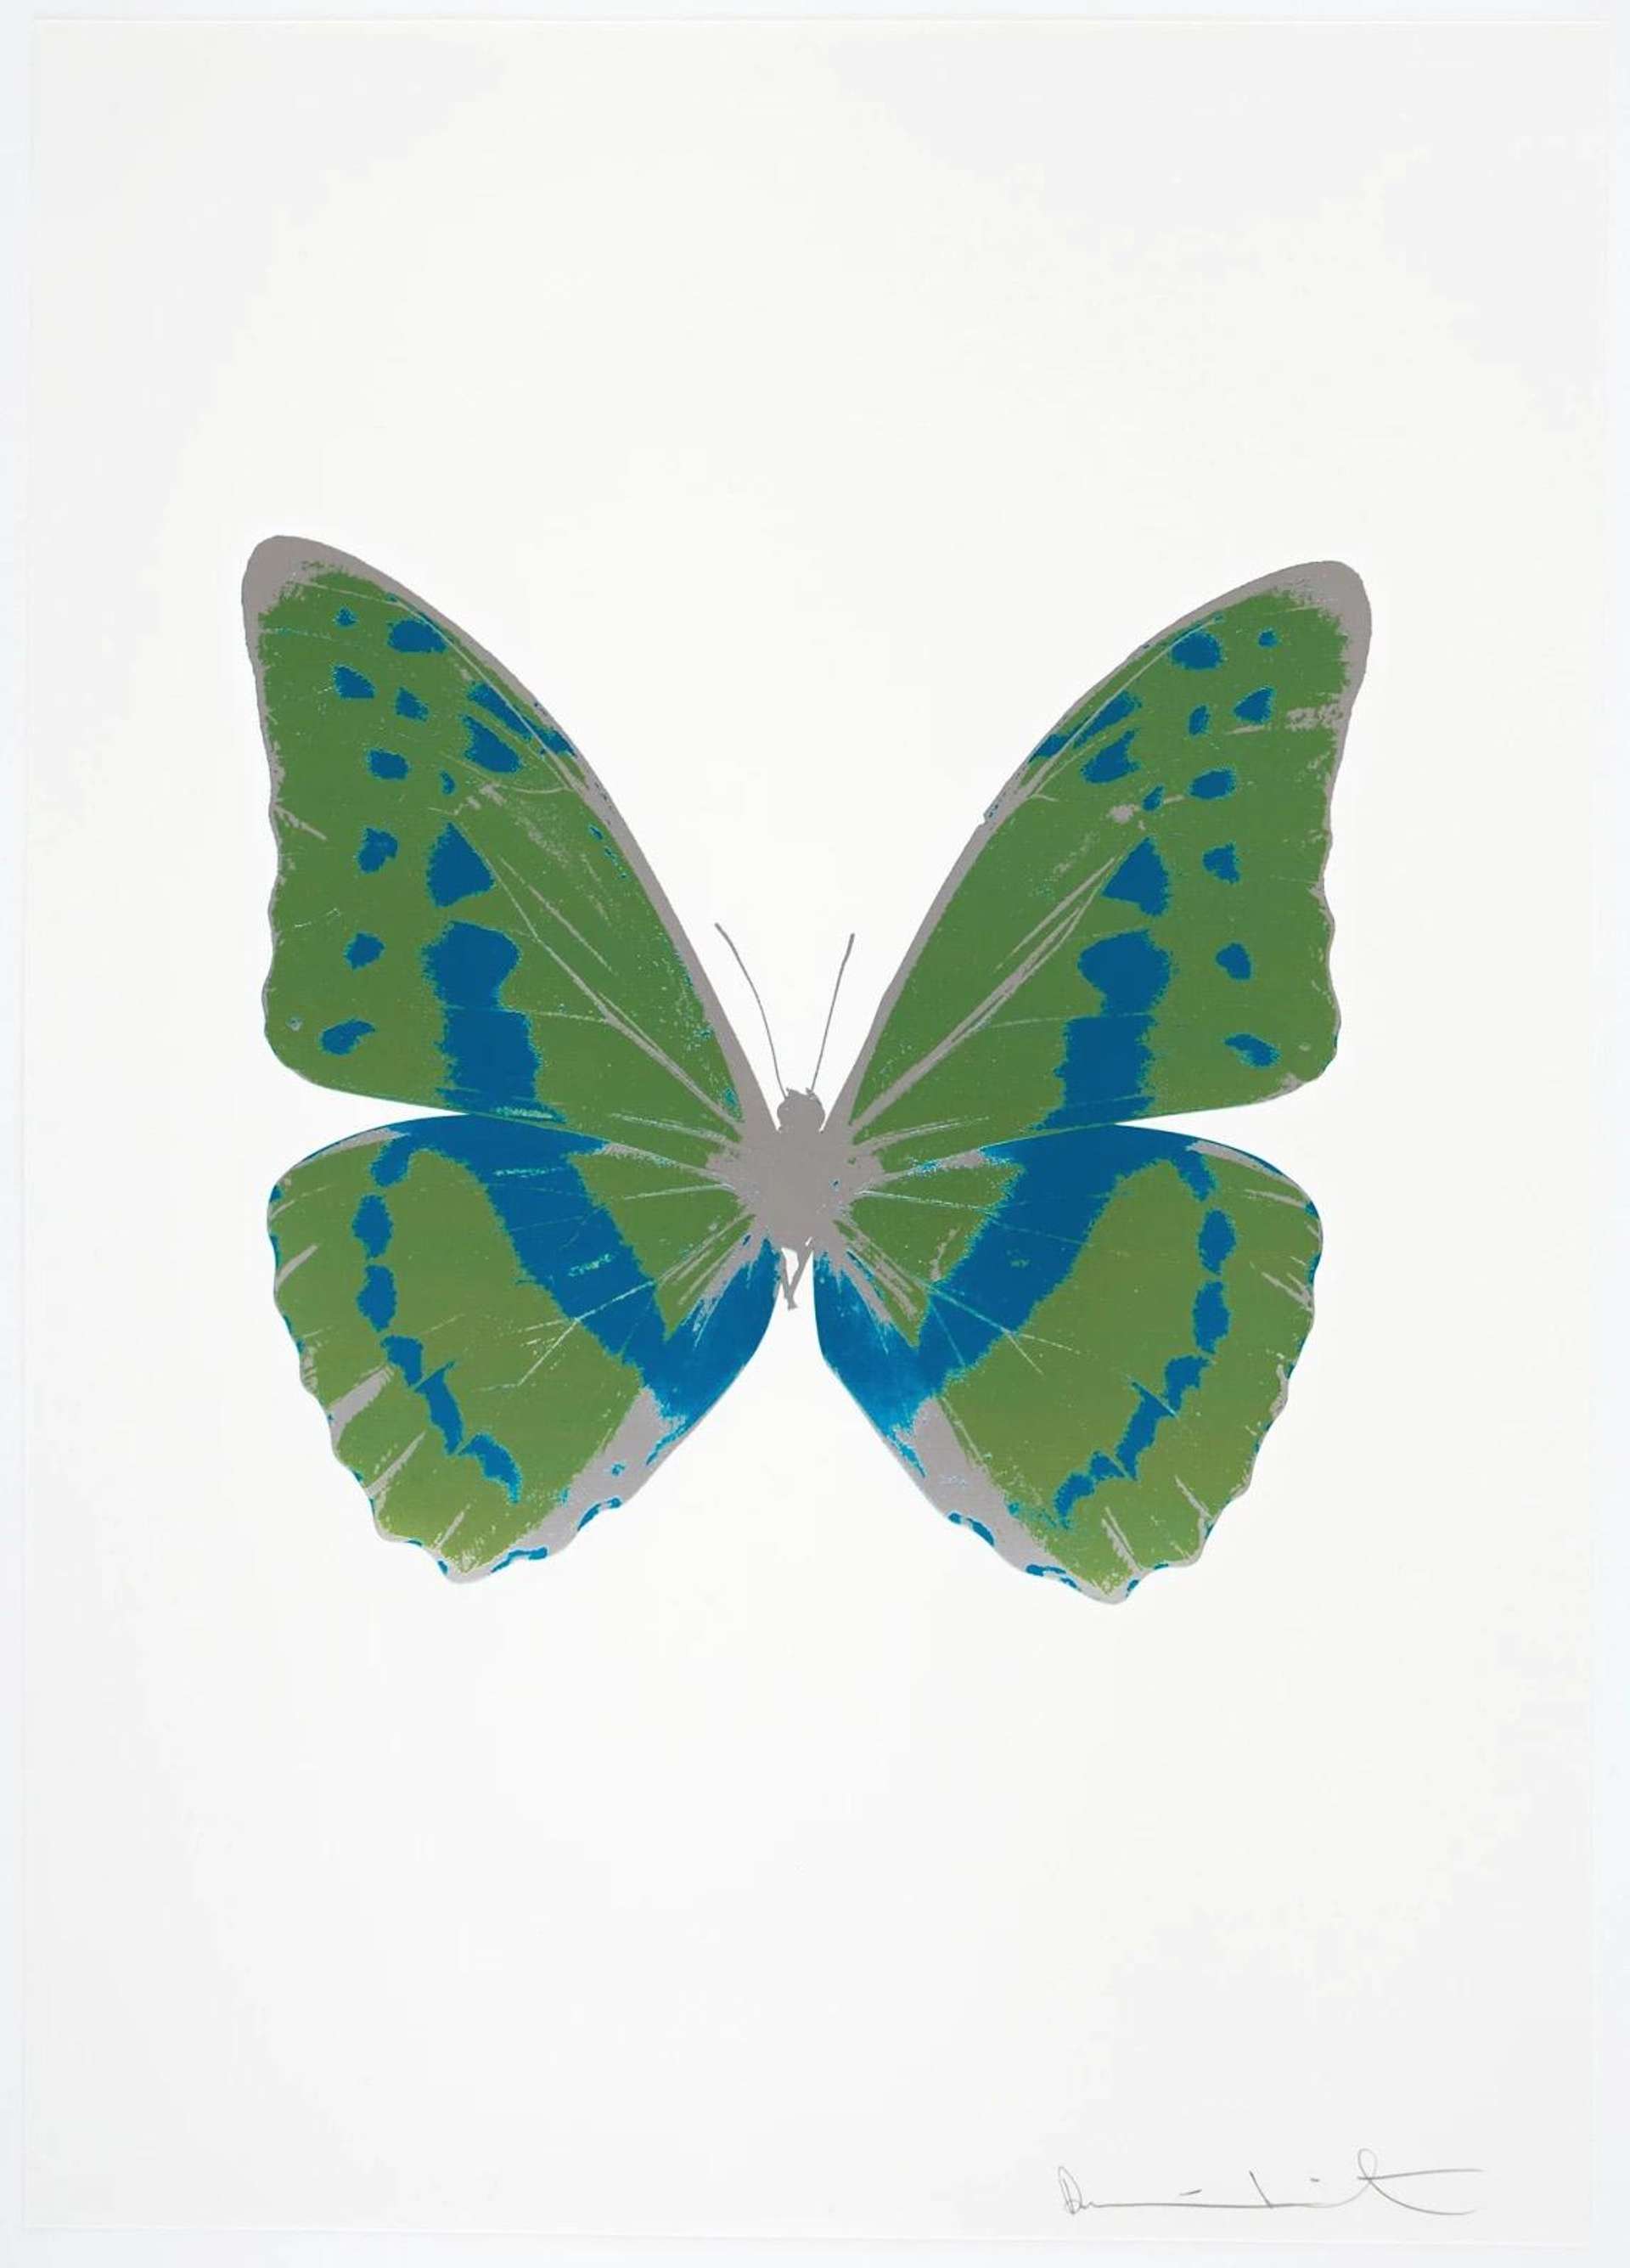 The Souls III (leaf green, turquoise, silver gloss) - Signed Print by Damien Hirst 2010 - MyArtBroker